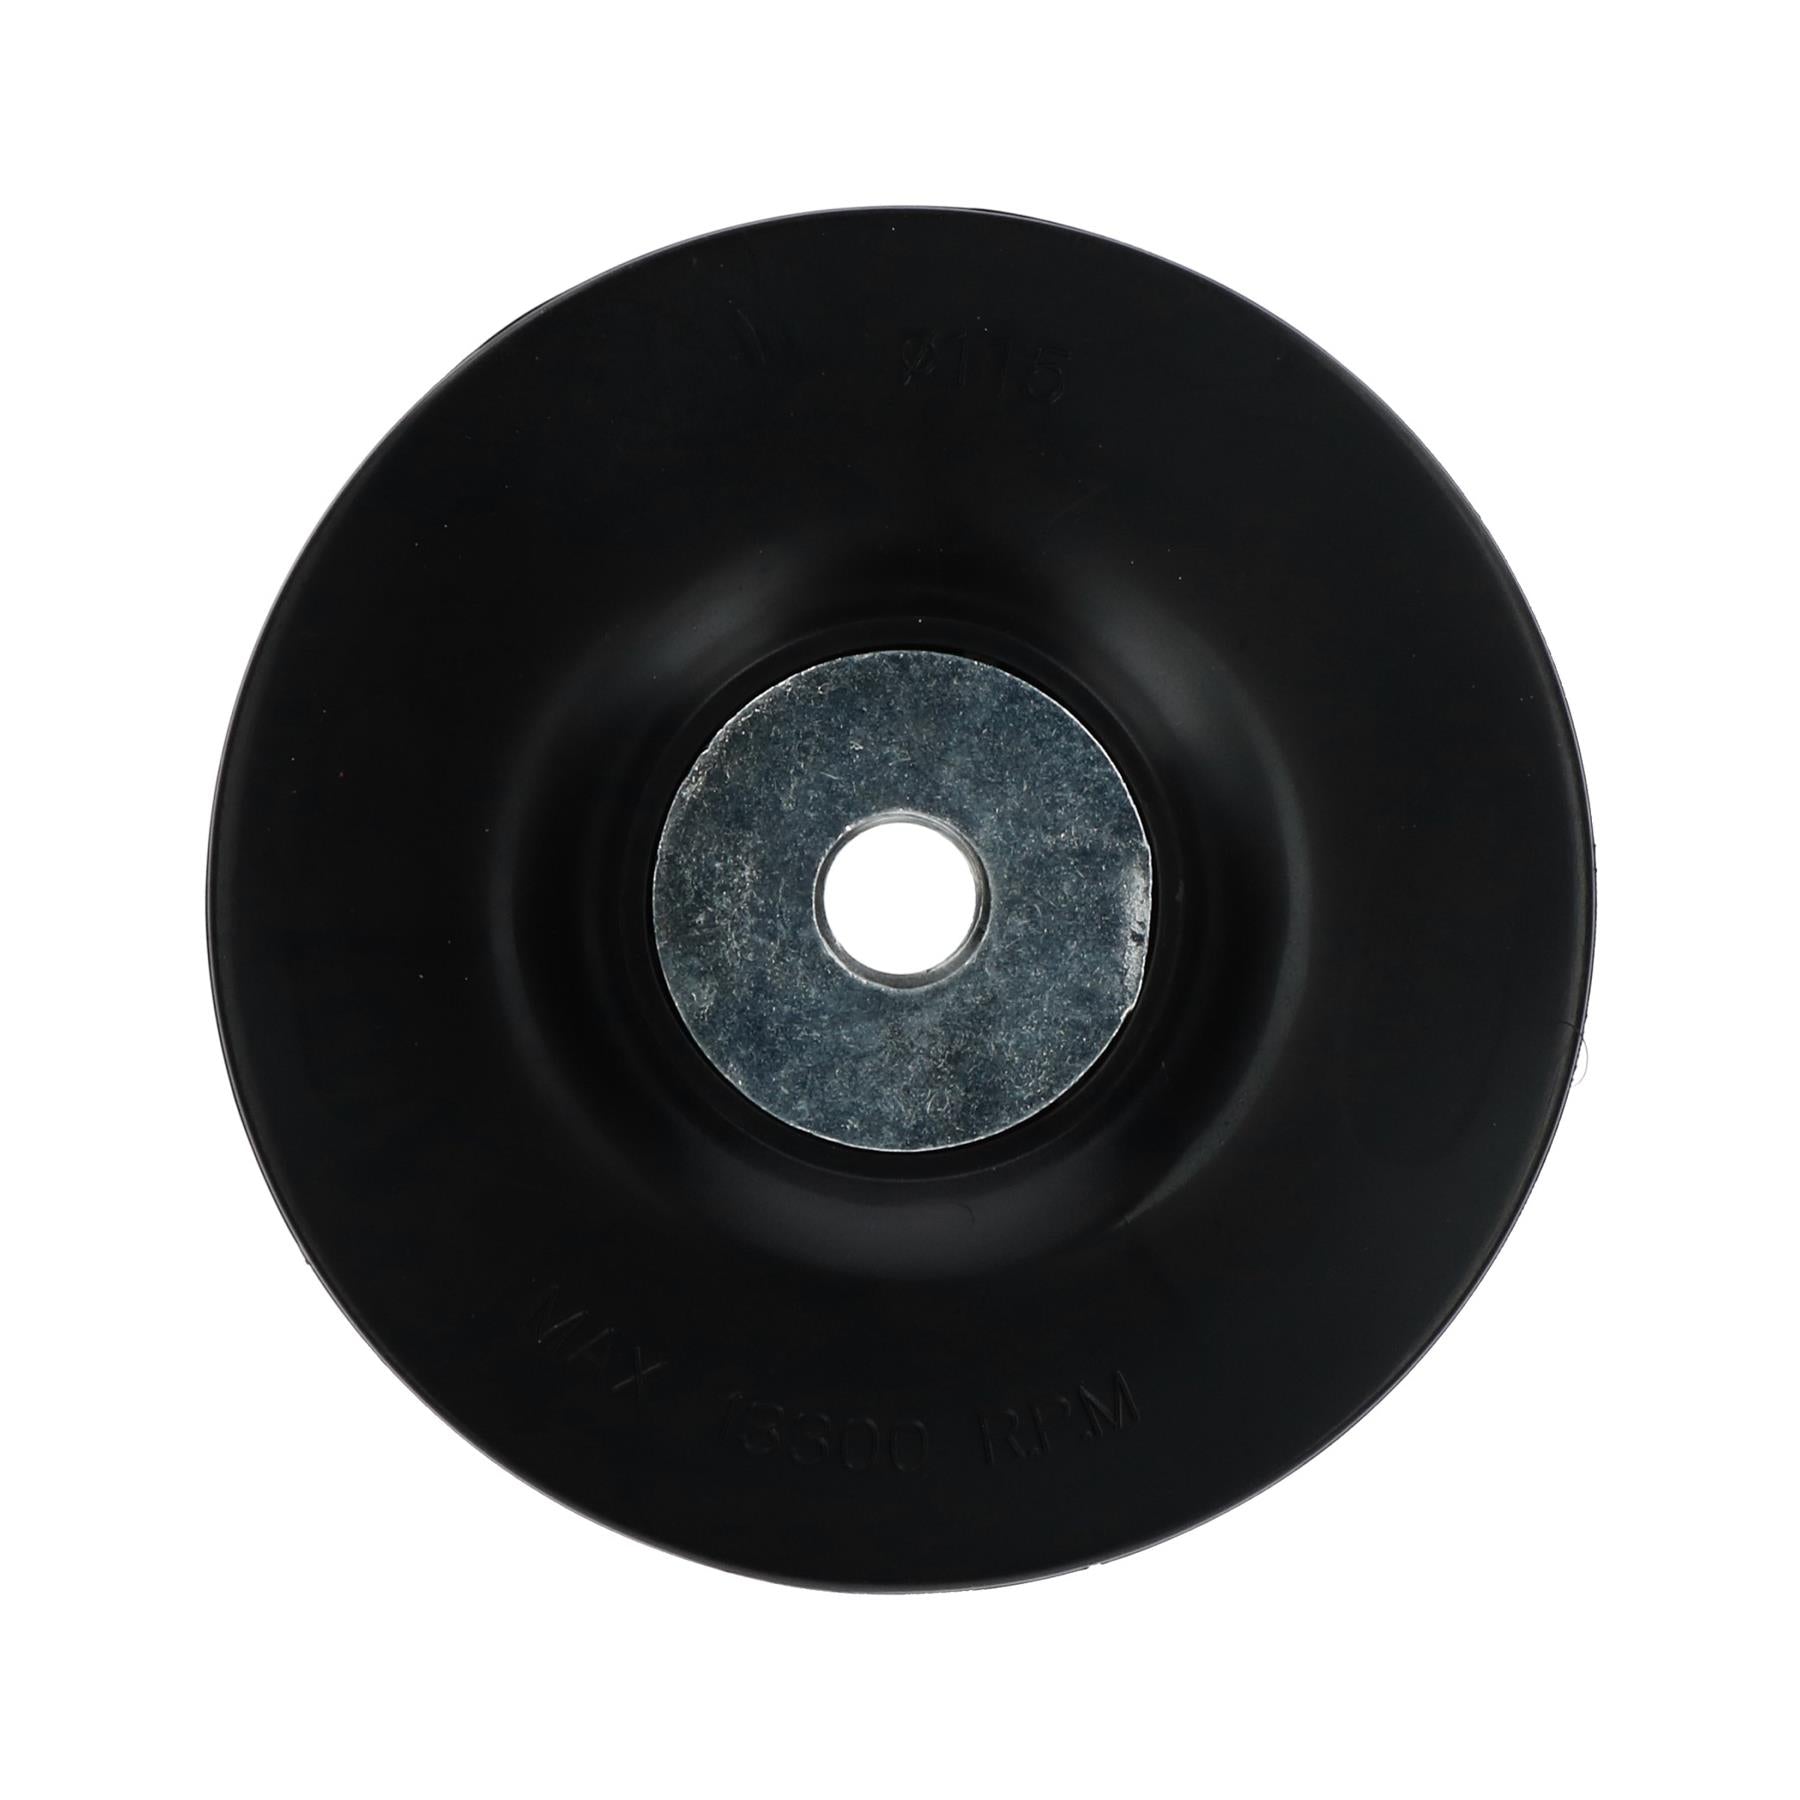 M14 115mm Thread Plastic Backing Pad For 4-1/2" Angle Grinders Sanders Discs